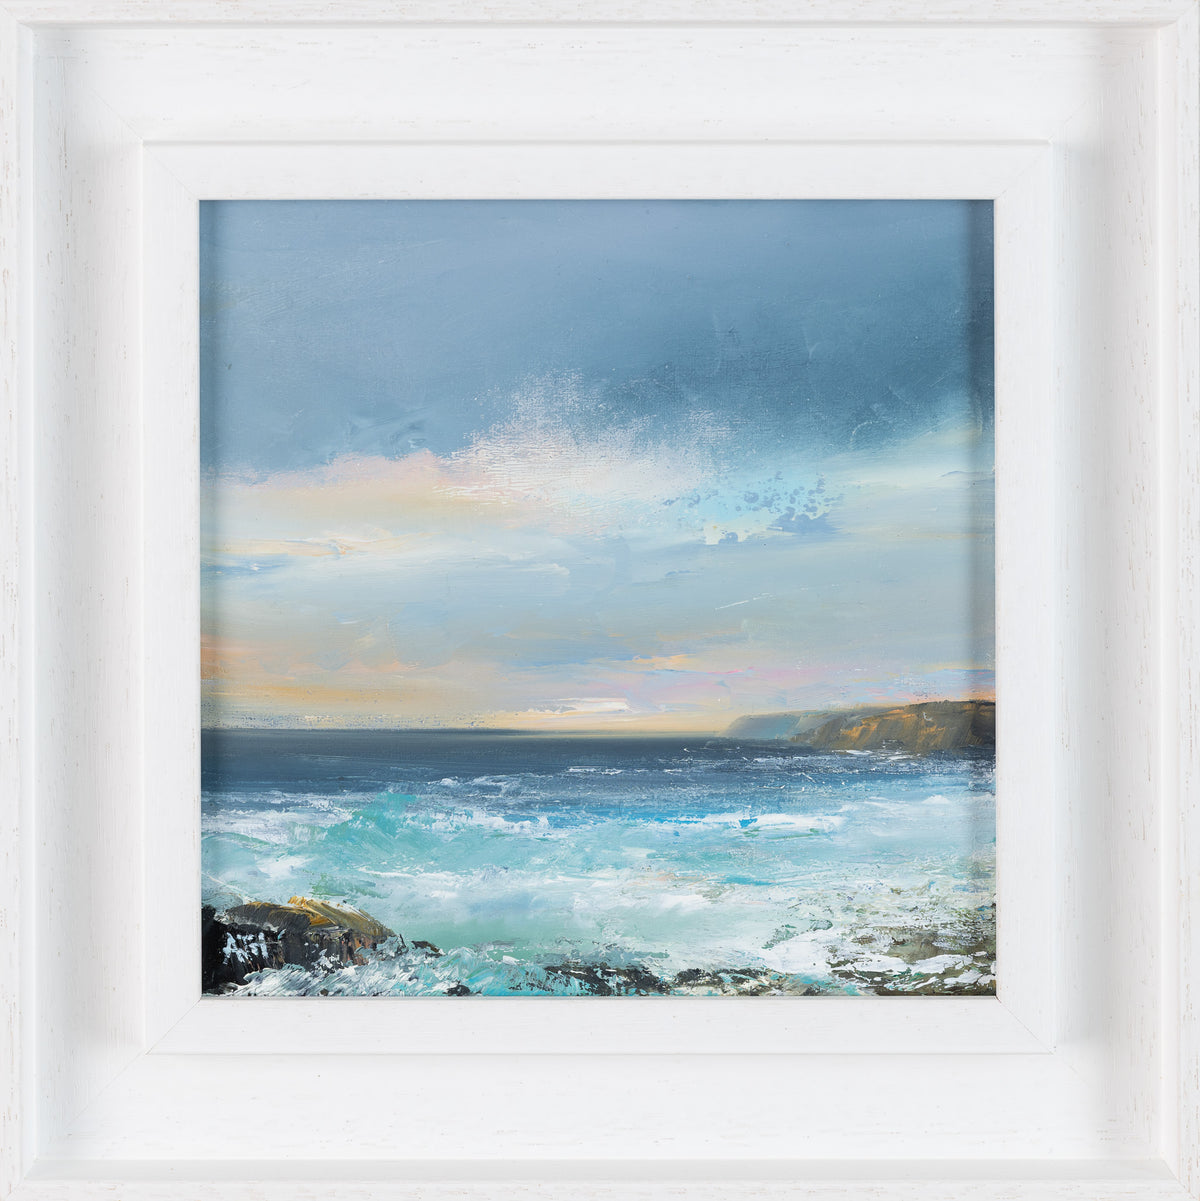 &#39;Evening Sky over Daymer Bay&#39; oil on board original by Amanda Hoskin, available at Padstow Gallery, Cornwall